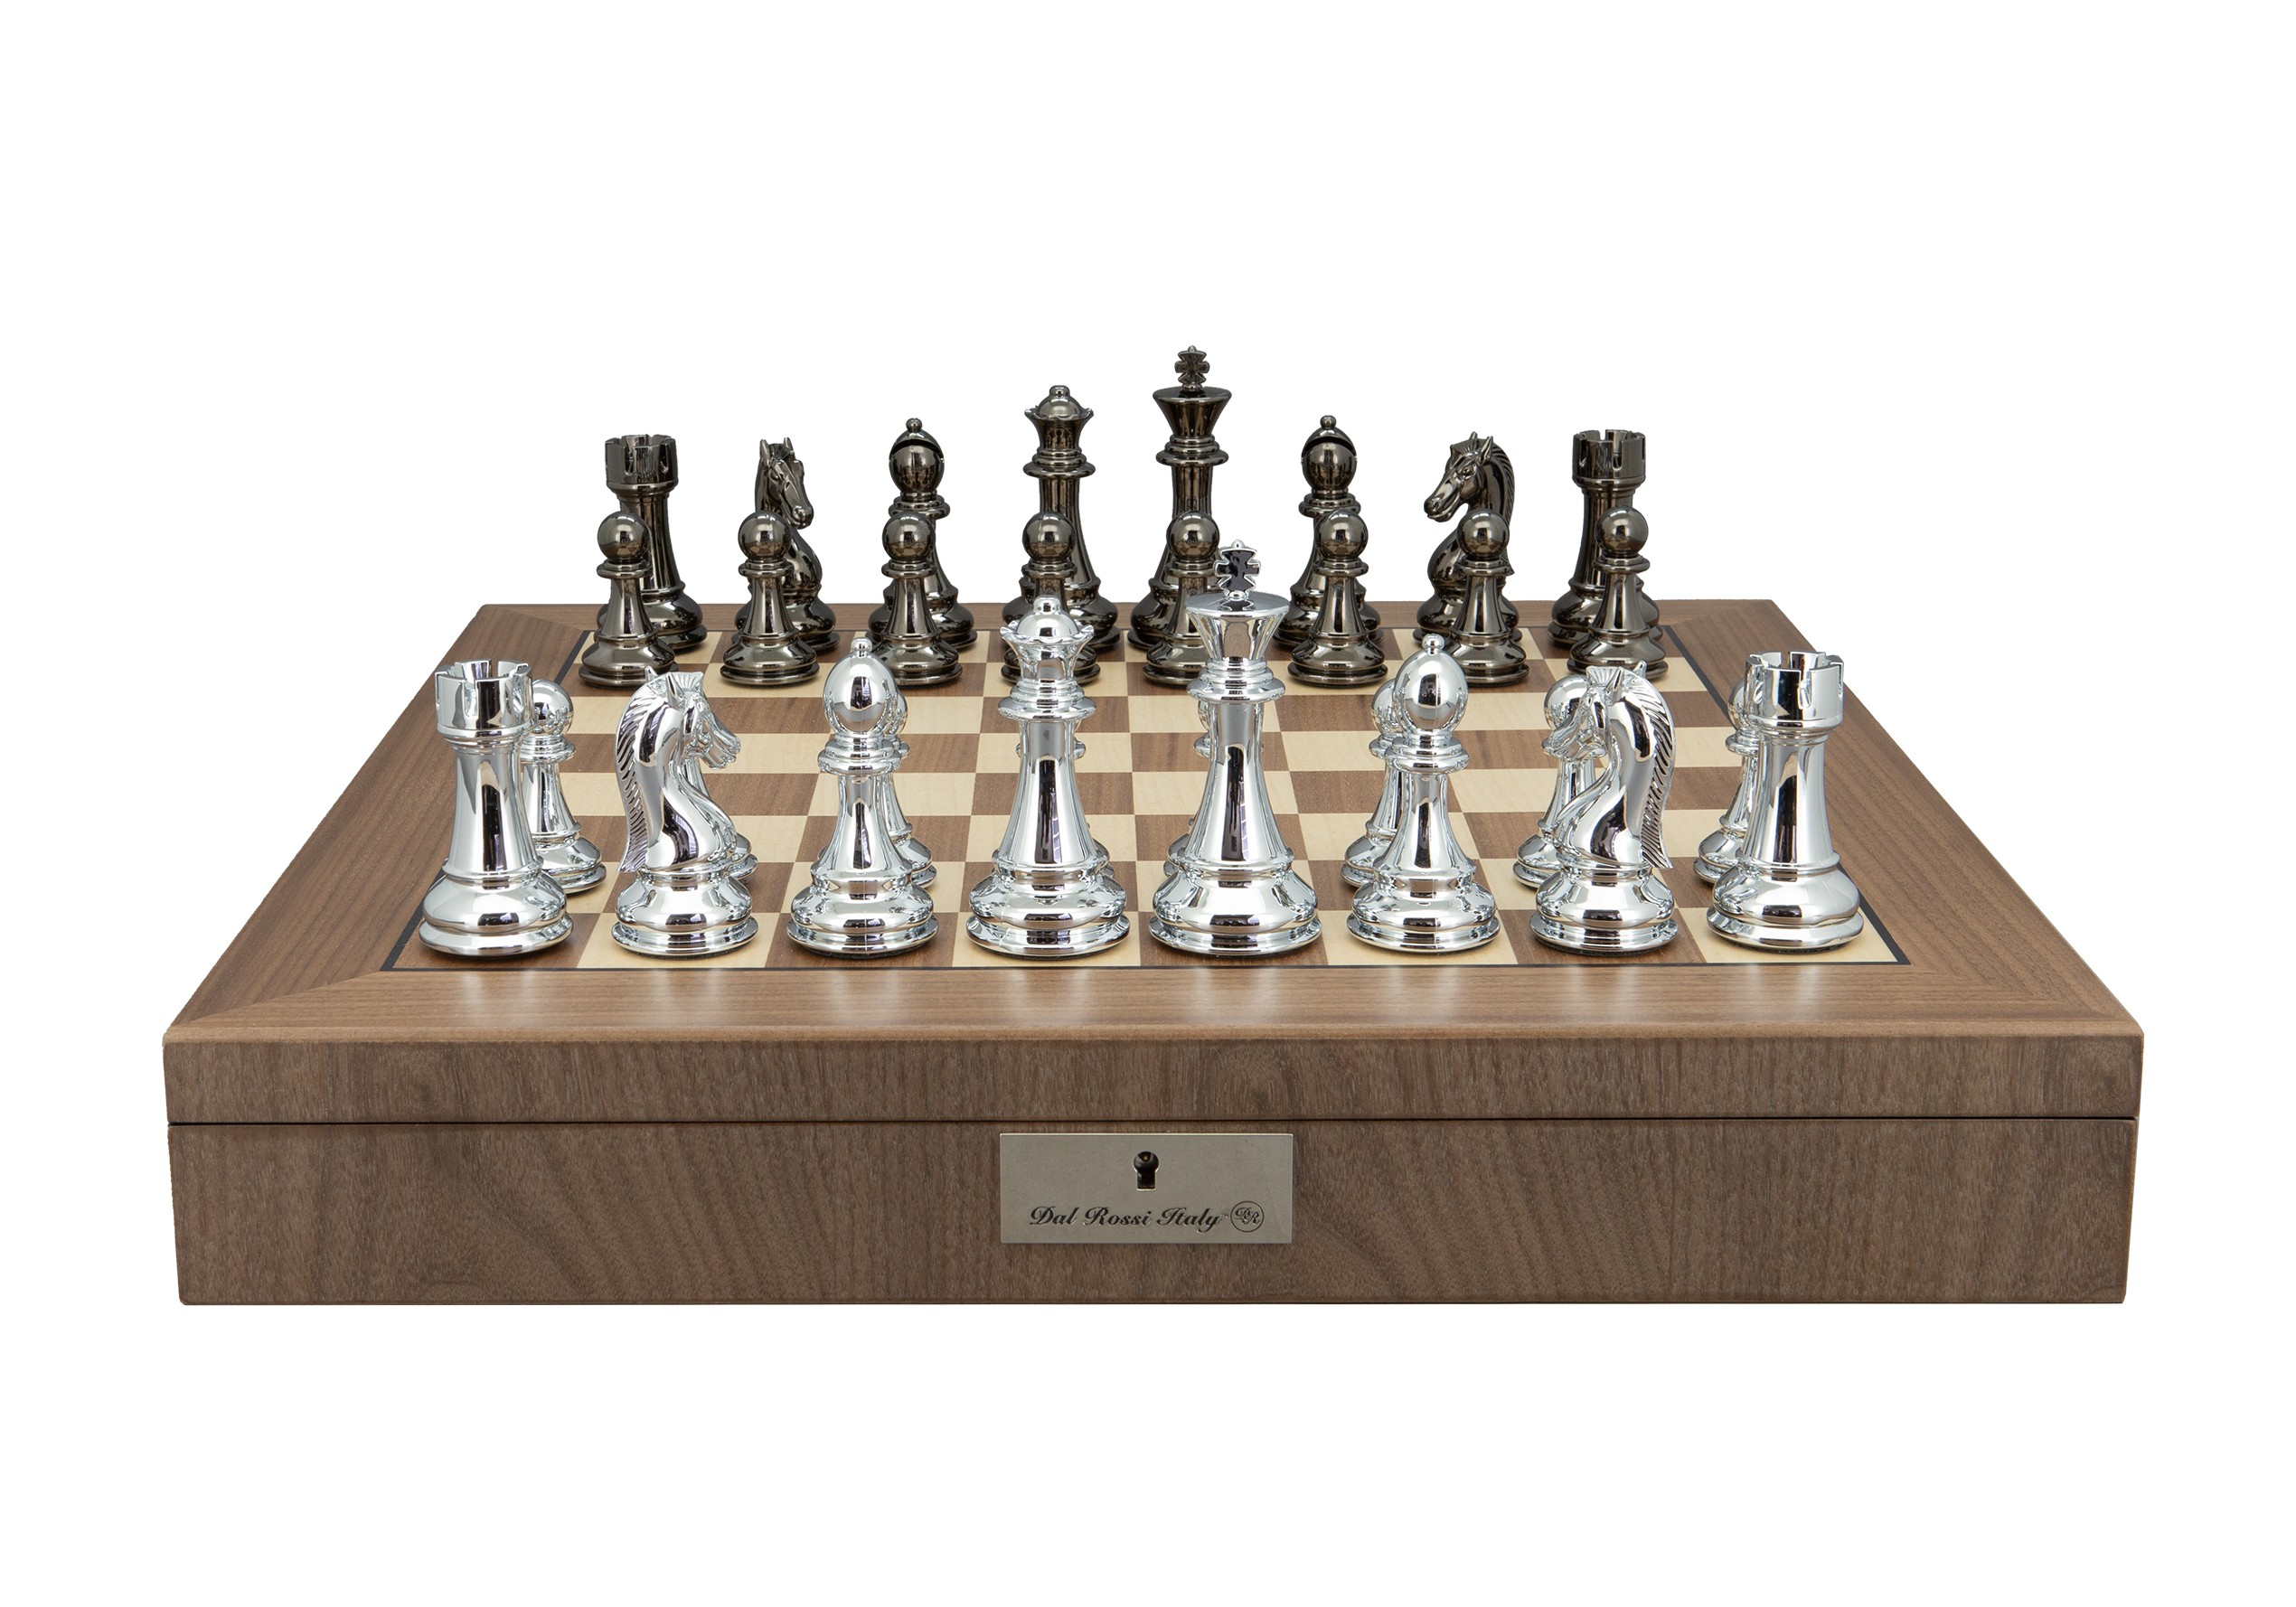 Dal Rossi Italy Silver and Black Weight  Chess pieces110mm Chessmen on a Walnut Inlaid Chess Box with Compartments 20" 